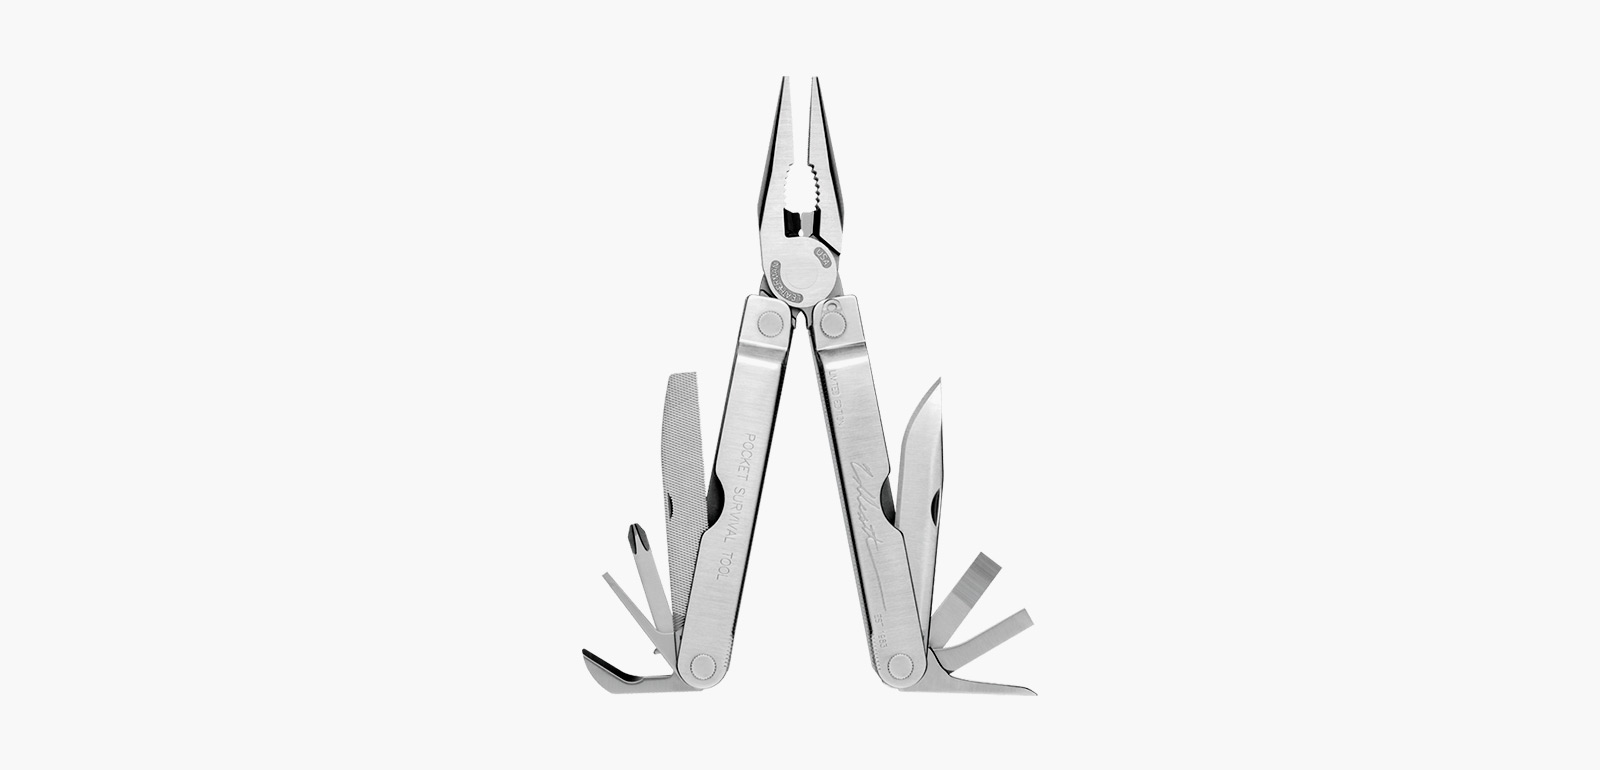 Leatherman Collector's Edition Pocket Survival Tool